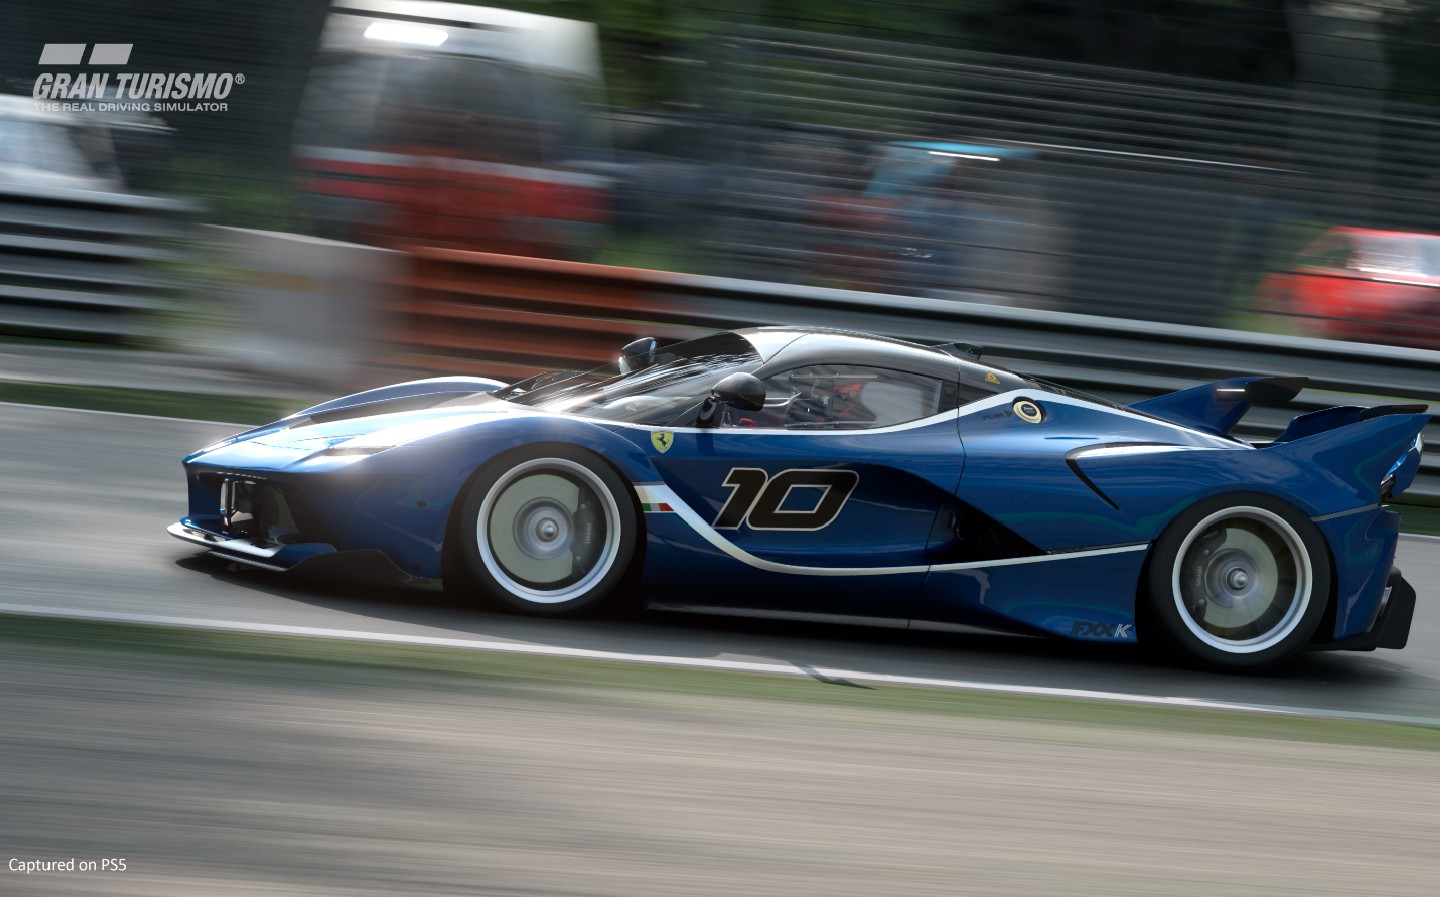 Gran Turismo 7 Review: Finding the racing line